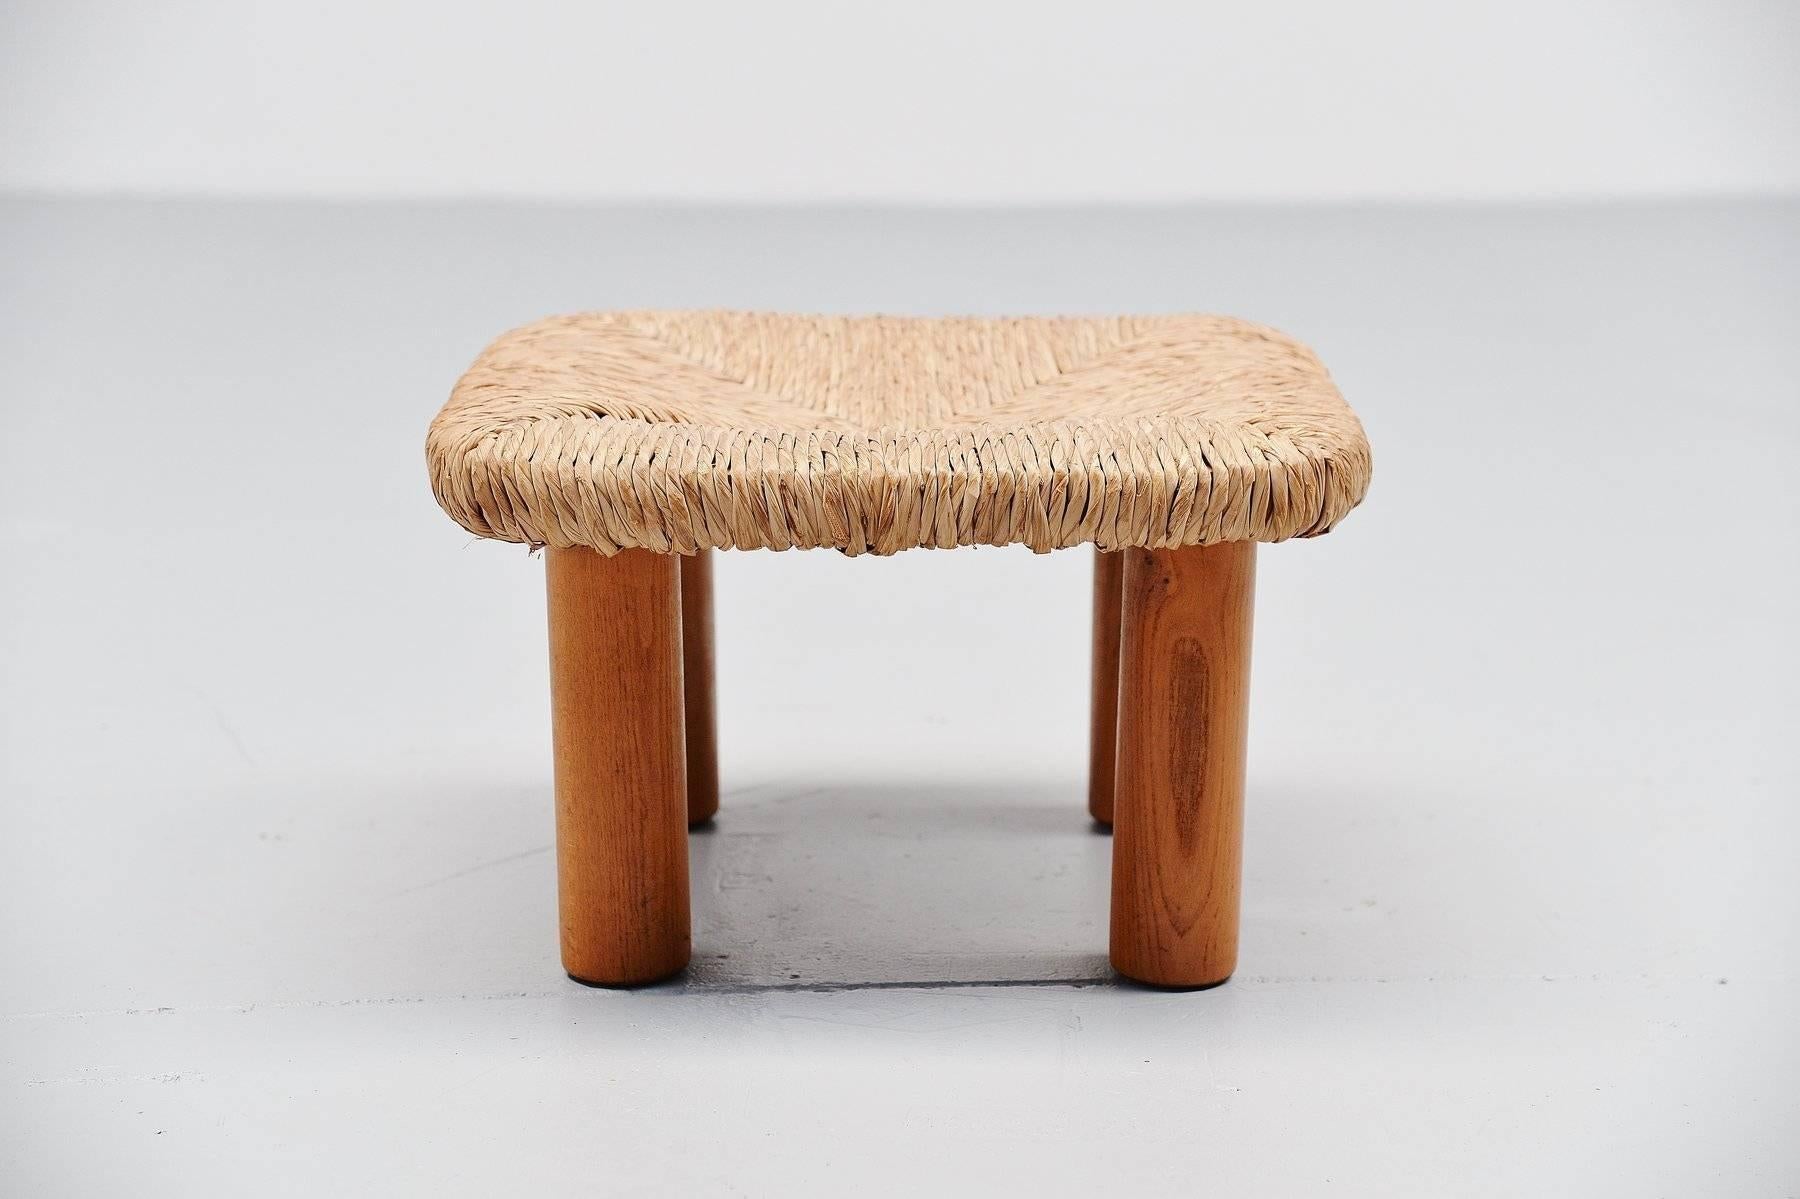 Very nice small stool designed and made by Wim Den Boon, Holland, 1950. This small stool has solid oak legs that can be disassembled from the metal structure frame. This stool is very similar to several designs by Charlotte Perriand. Very nice and